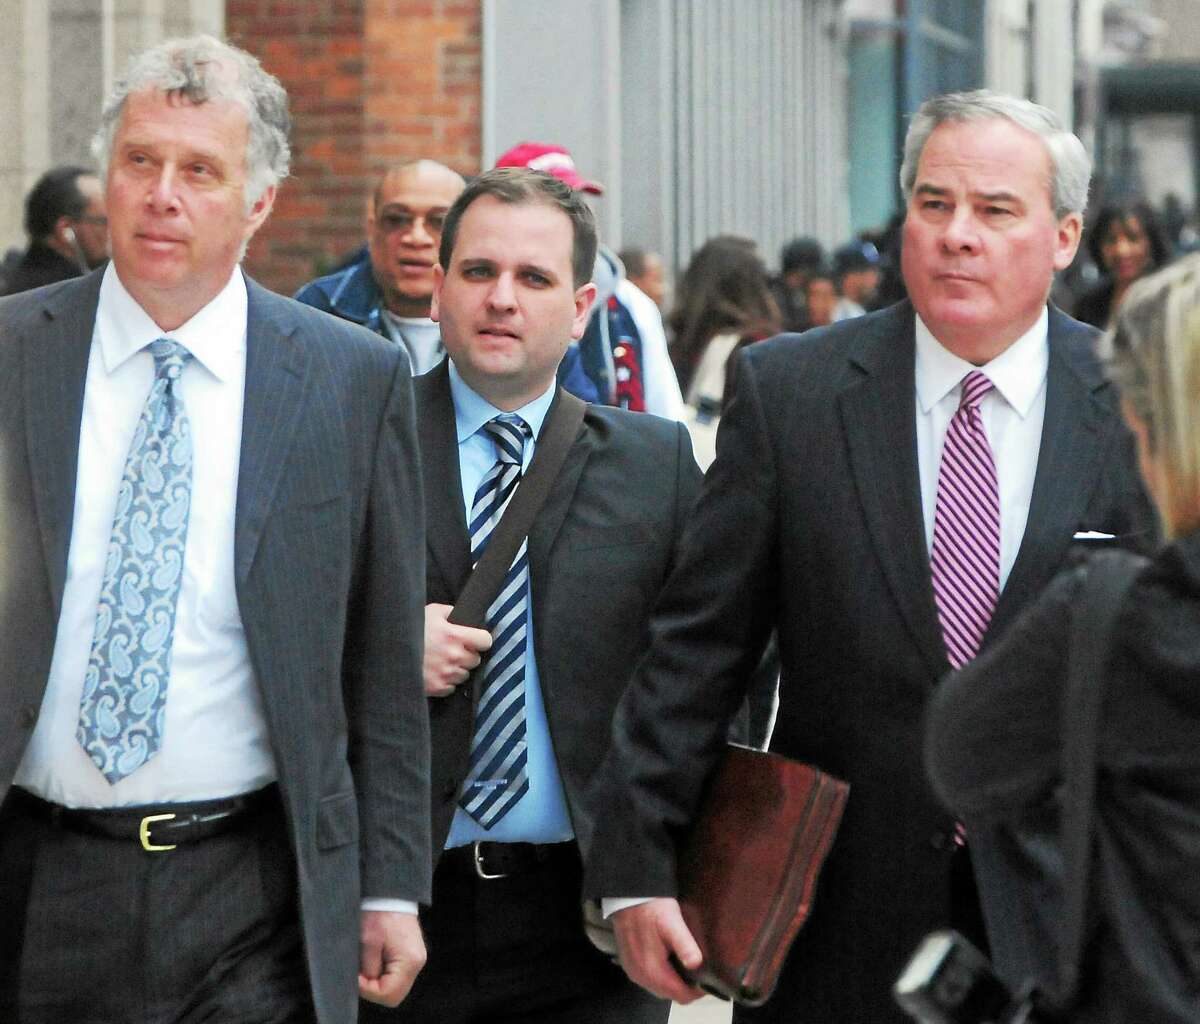 Former Connecticut Gov. John G. Rowland, right, arrives with his attorney Reid Weingarten, far left, at the Federal Courthouse in New Haven in this 2014 file photo.